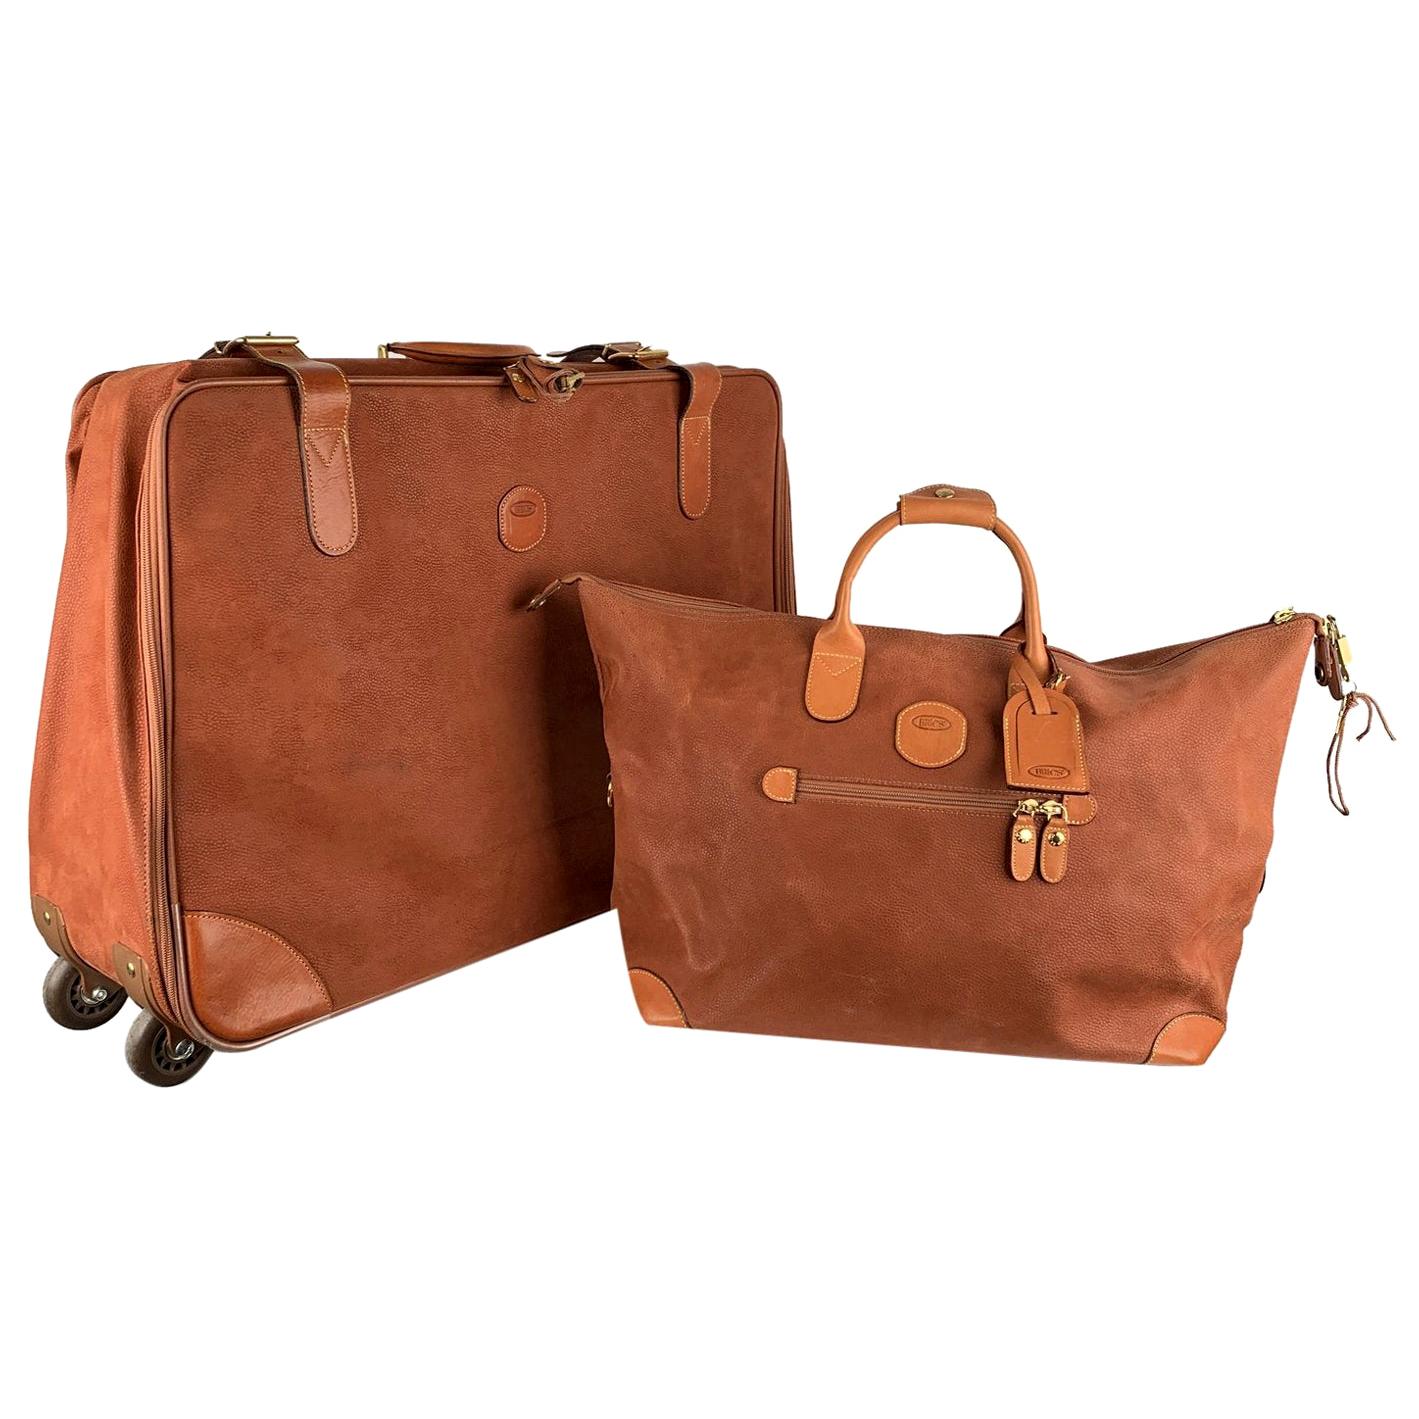 Bric's Tan Leather Travel Set Suitcase and Holdall Bag